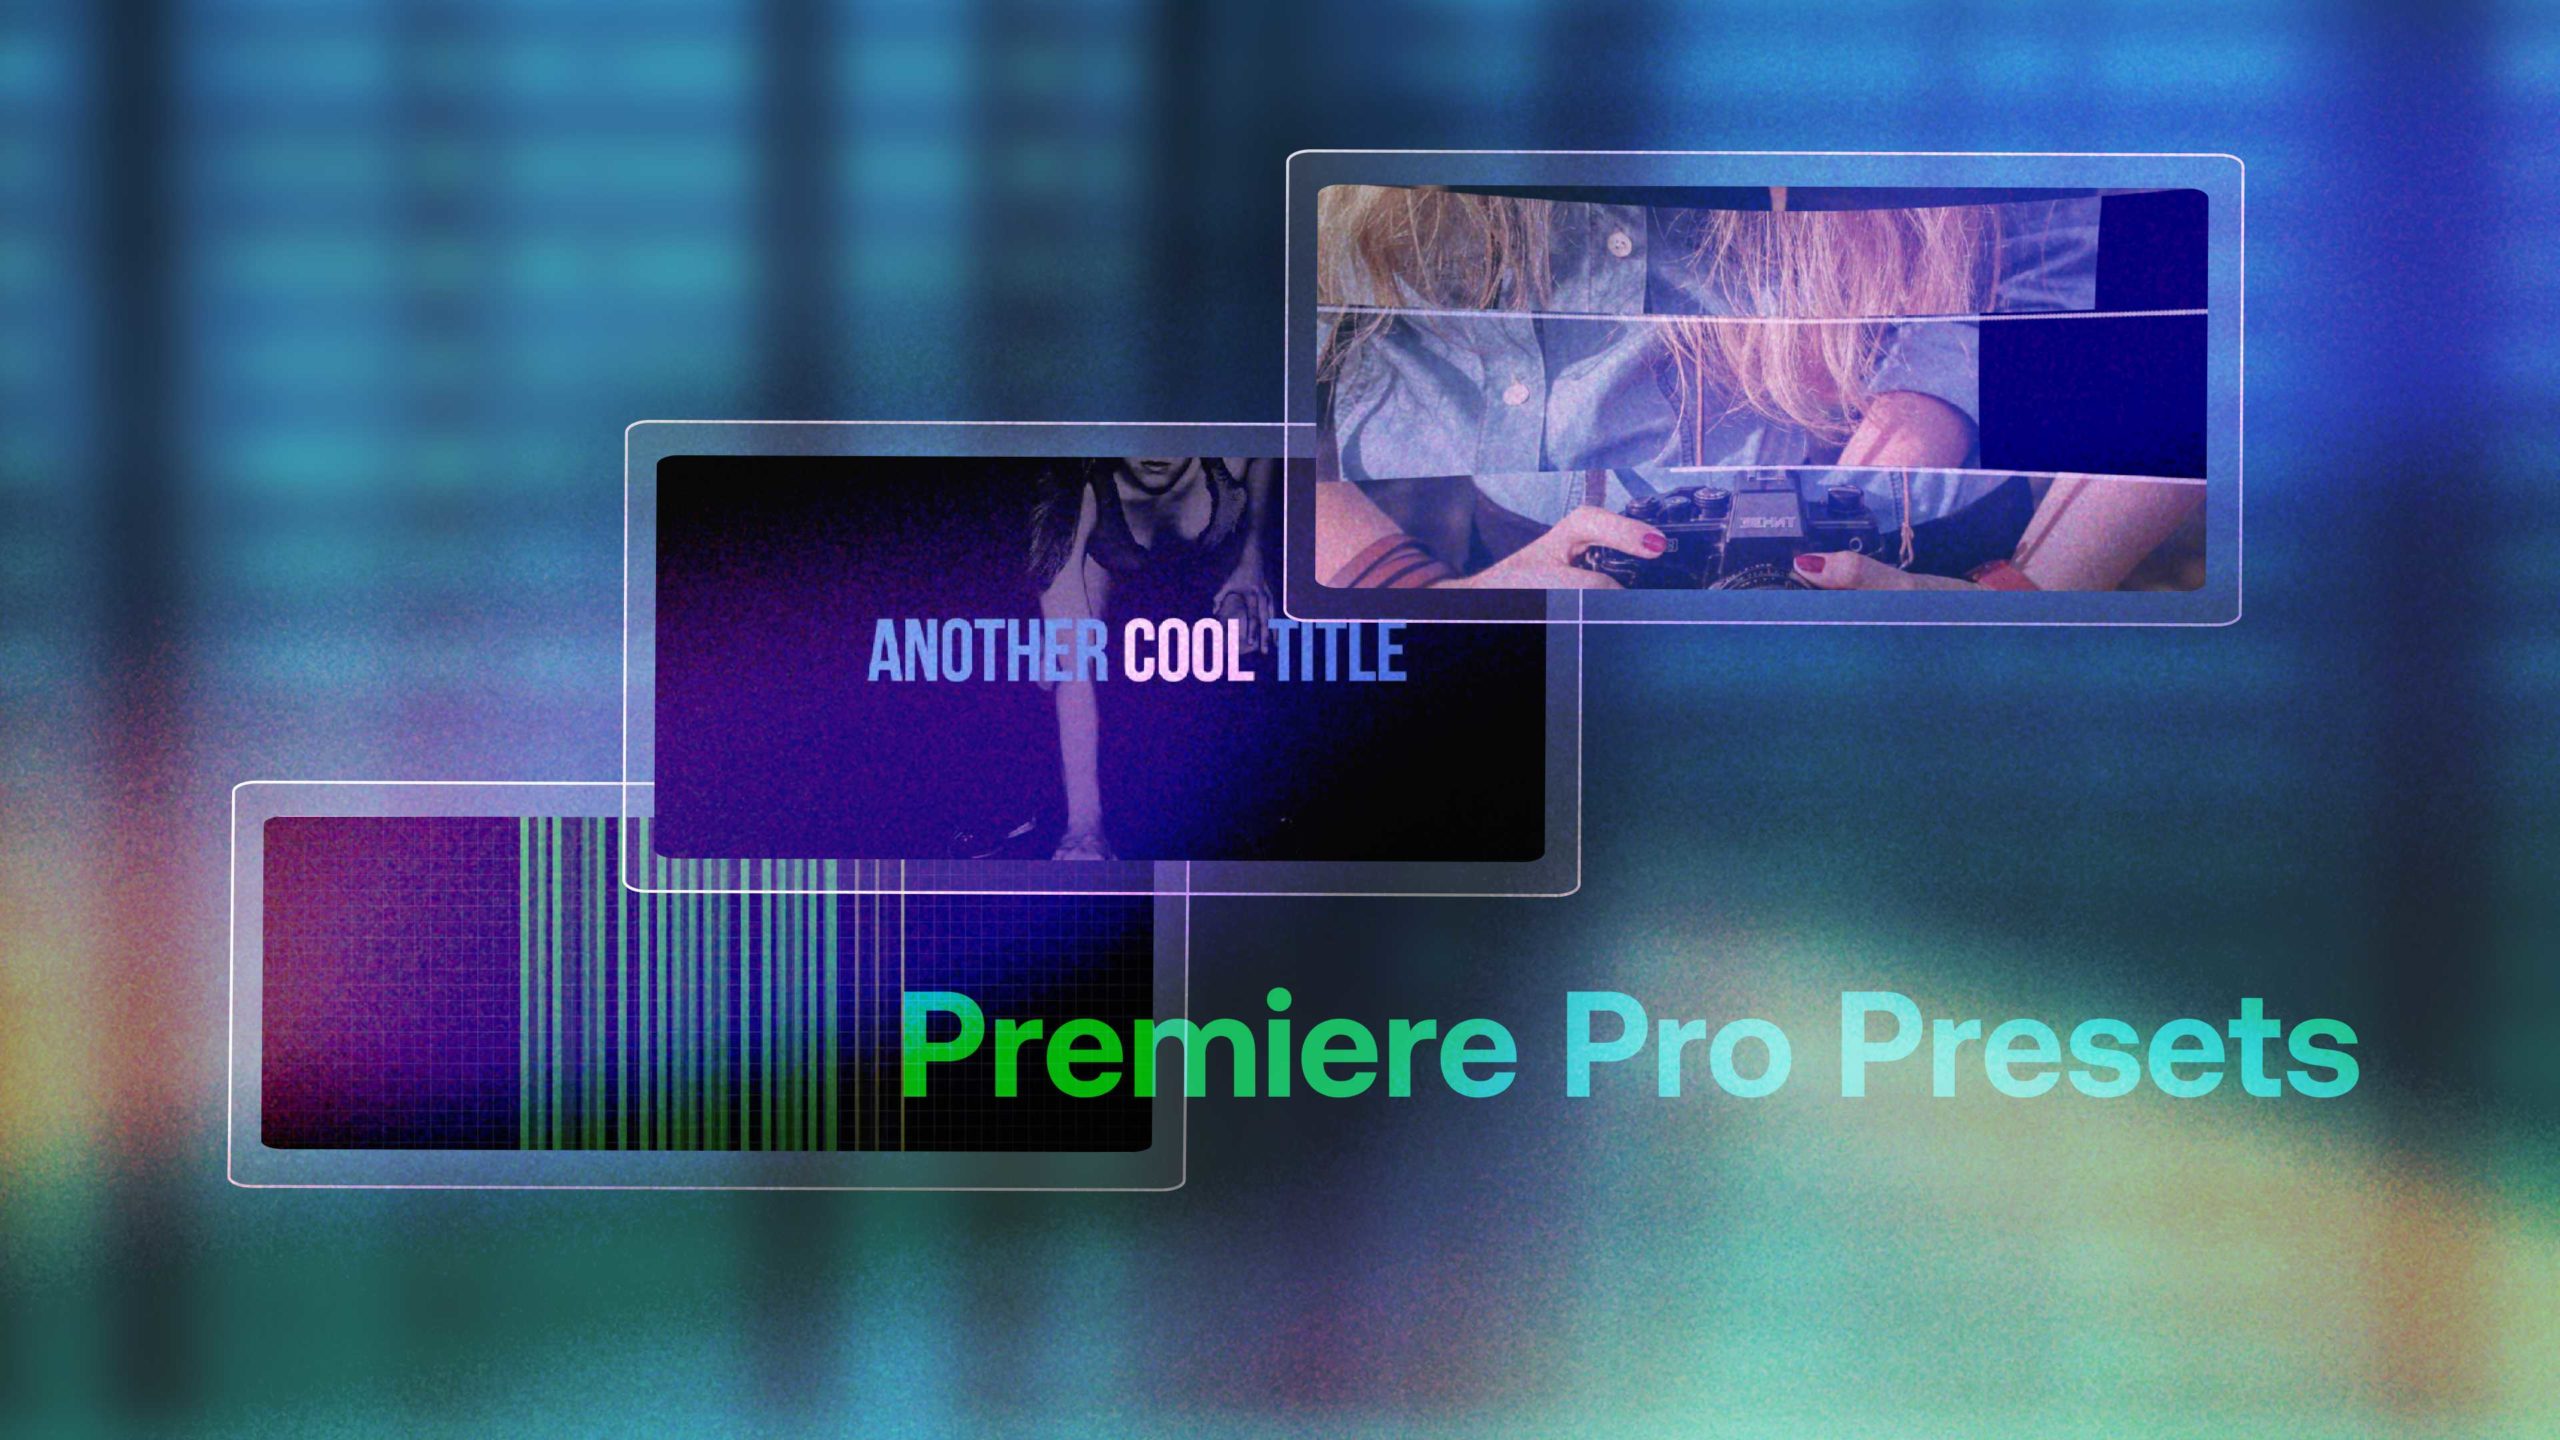 Premiere pro effects free download download java eclipse for windows 10